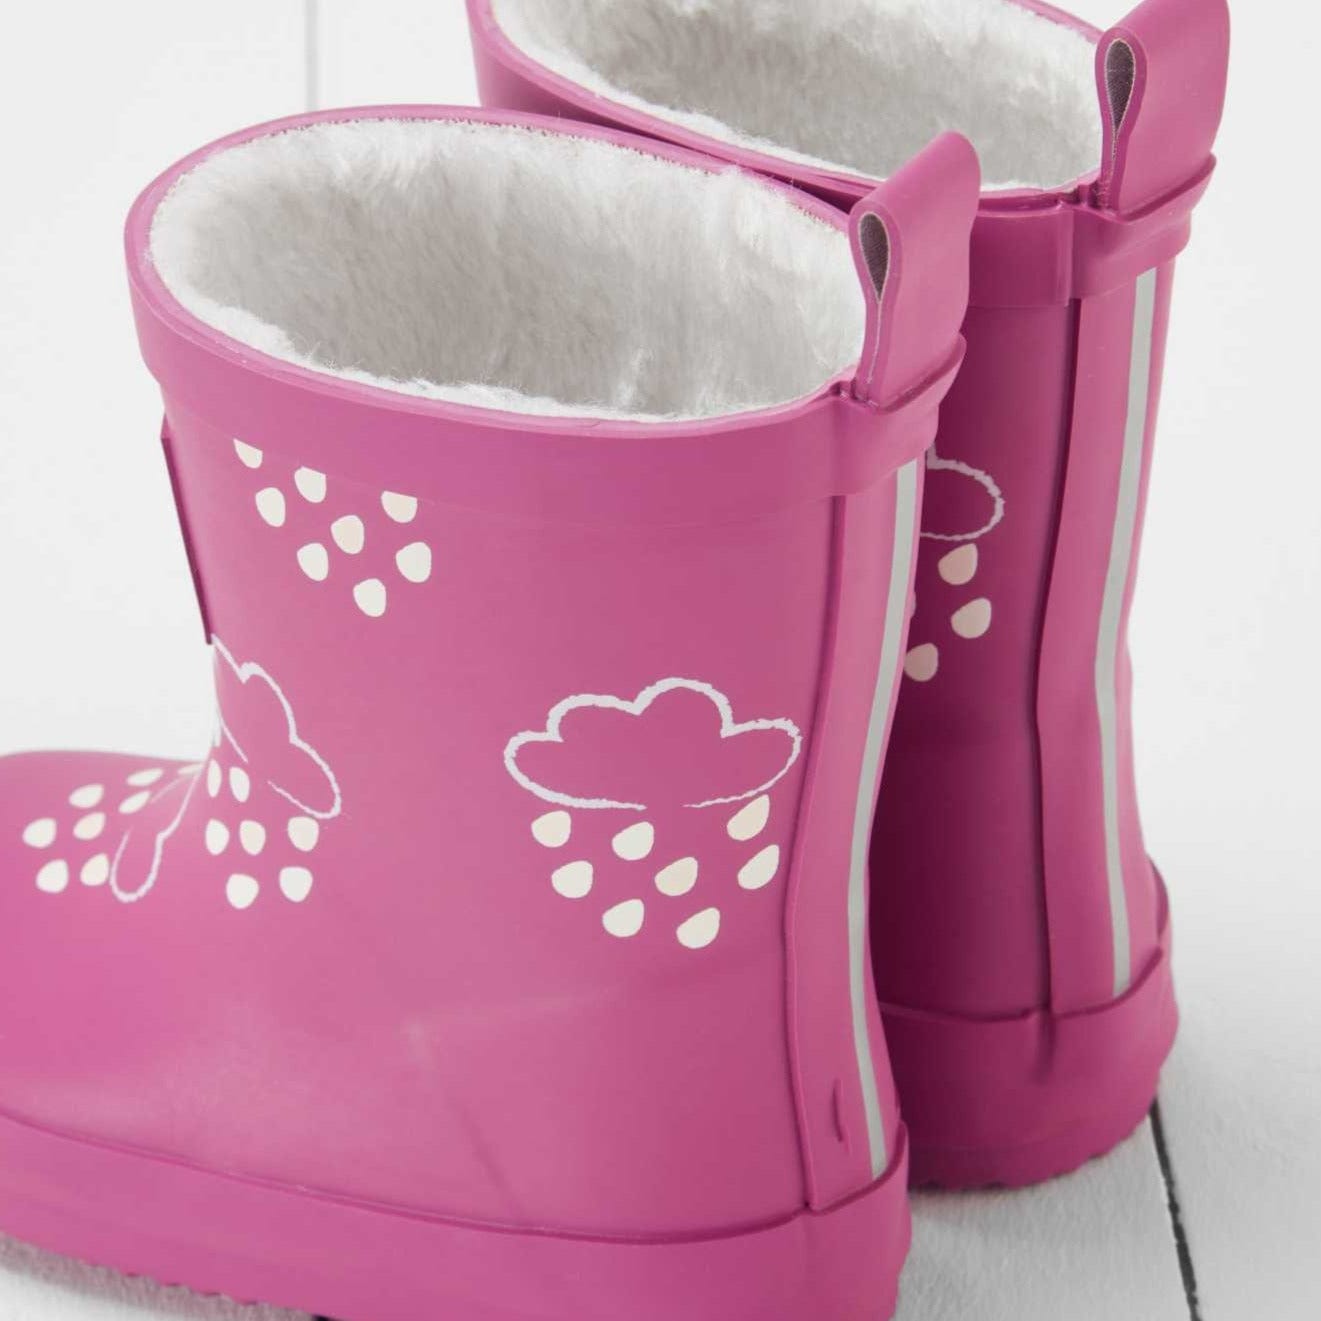 Grass & Air Wellie Boots Kids Colour Changing Wellies (Orchid Pink)